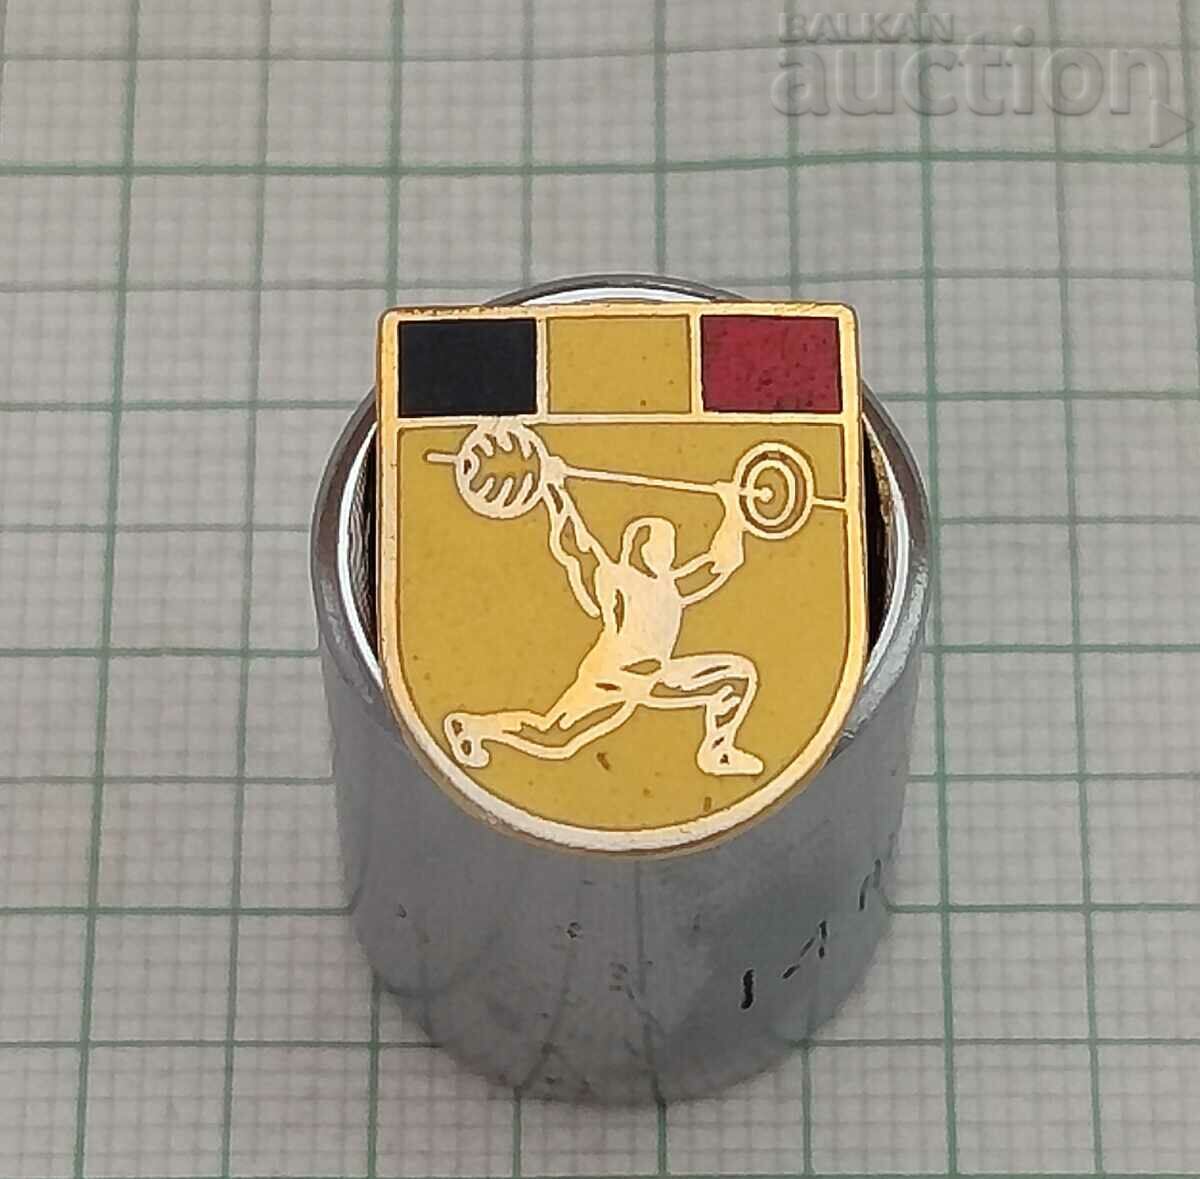 WEIGHTLIFTING GERMANY FEDERATION BADGE PIN